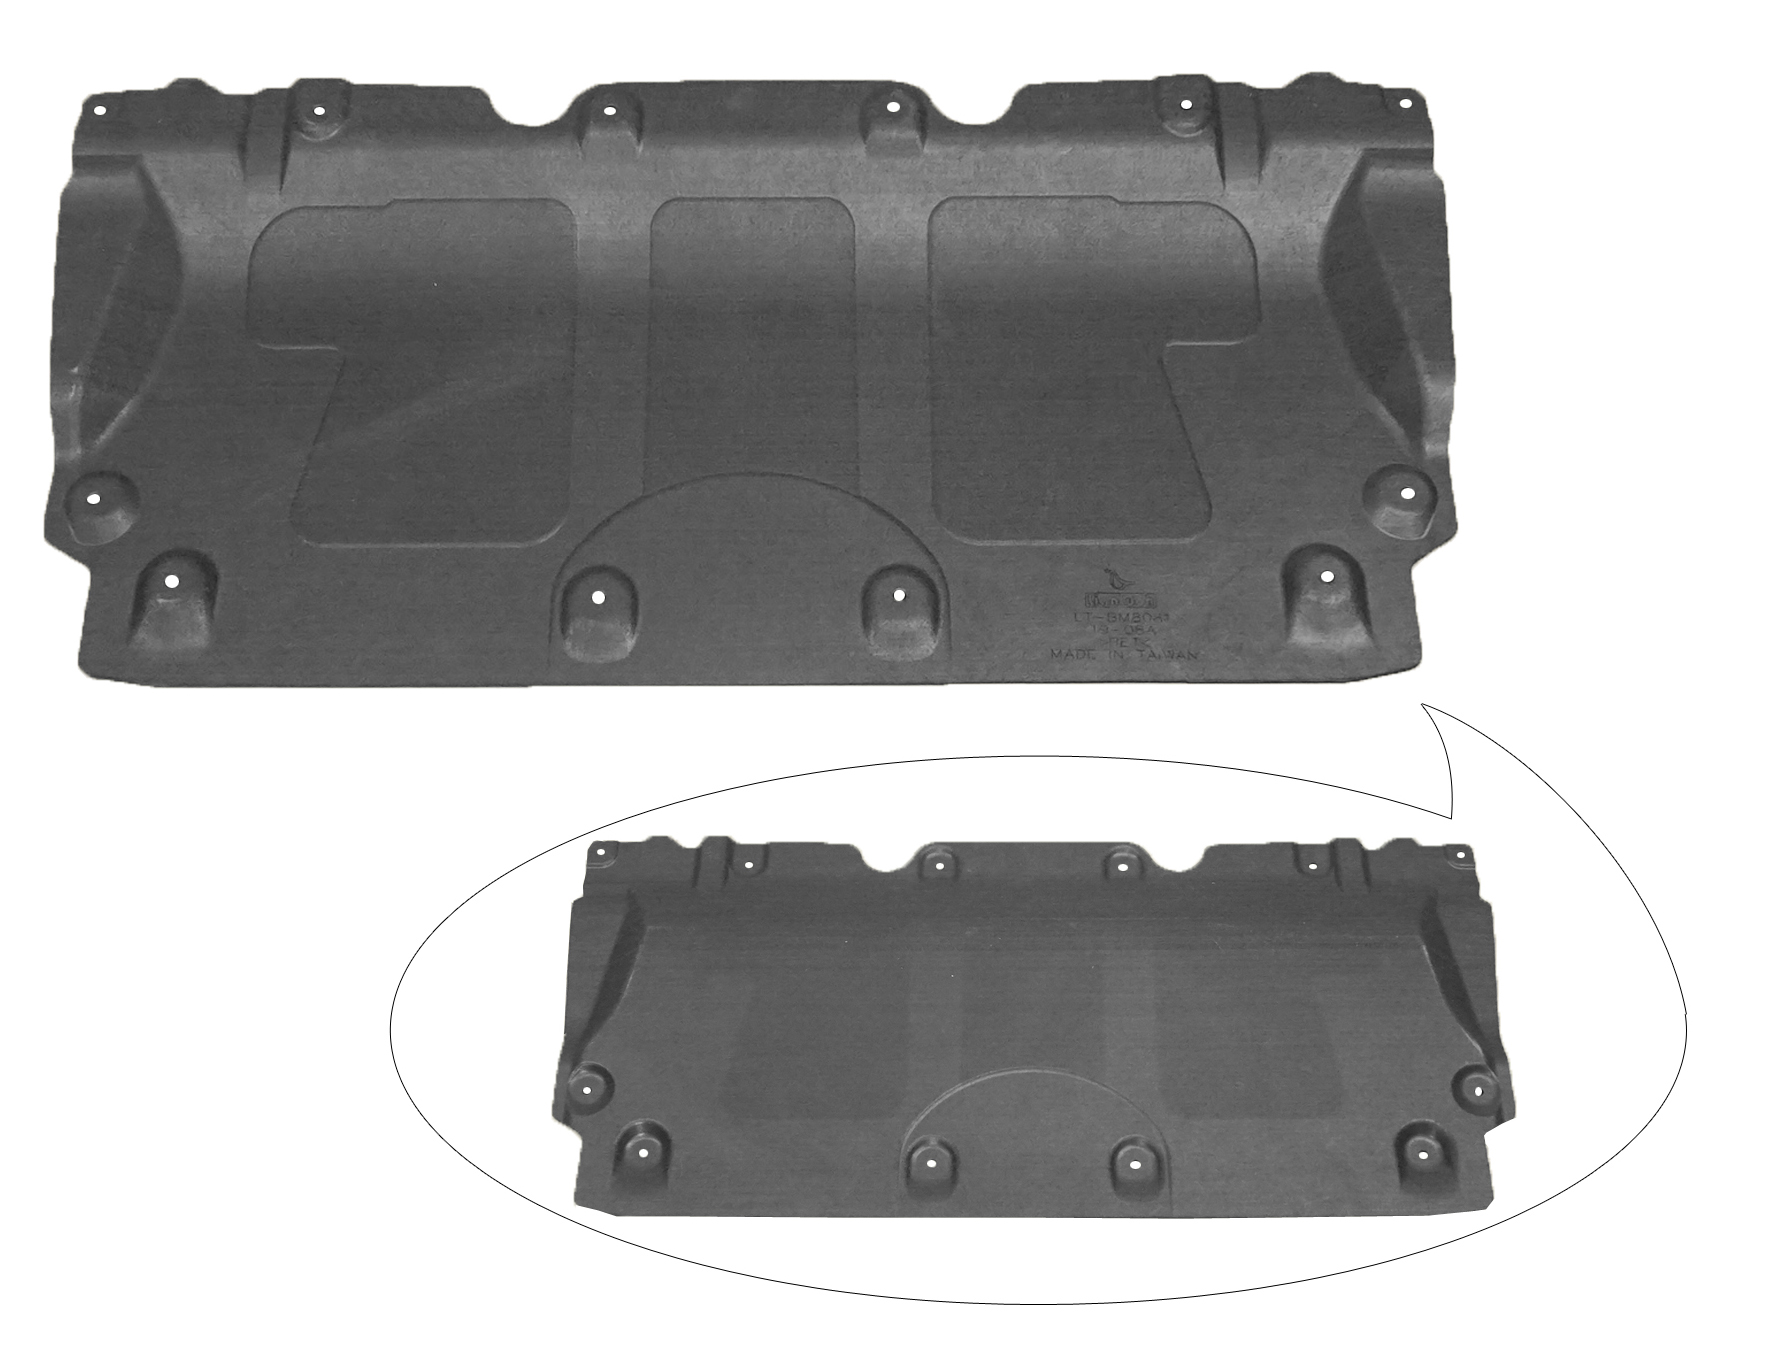 Aftermarket UNDER ENGINE COVERS for BMW - M340I, M340i,20-24,Lower engine cover